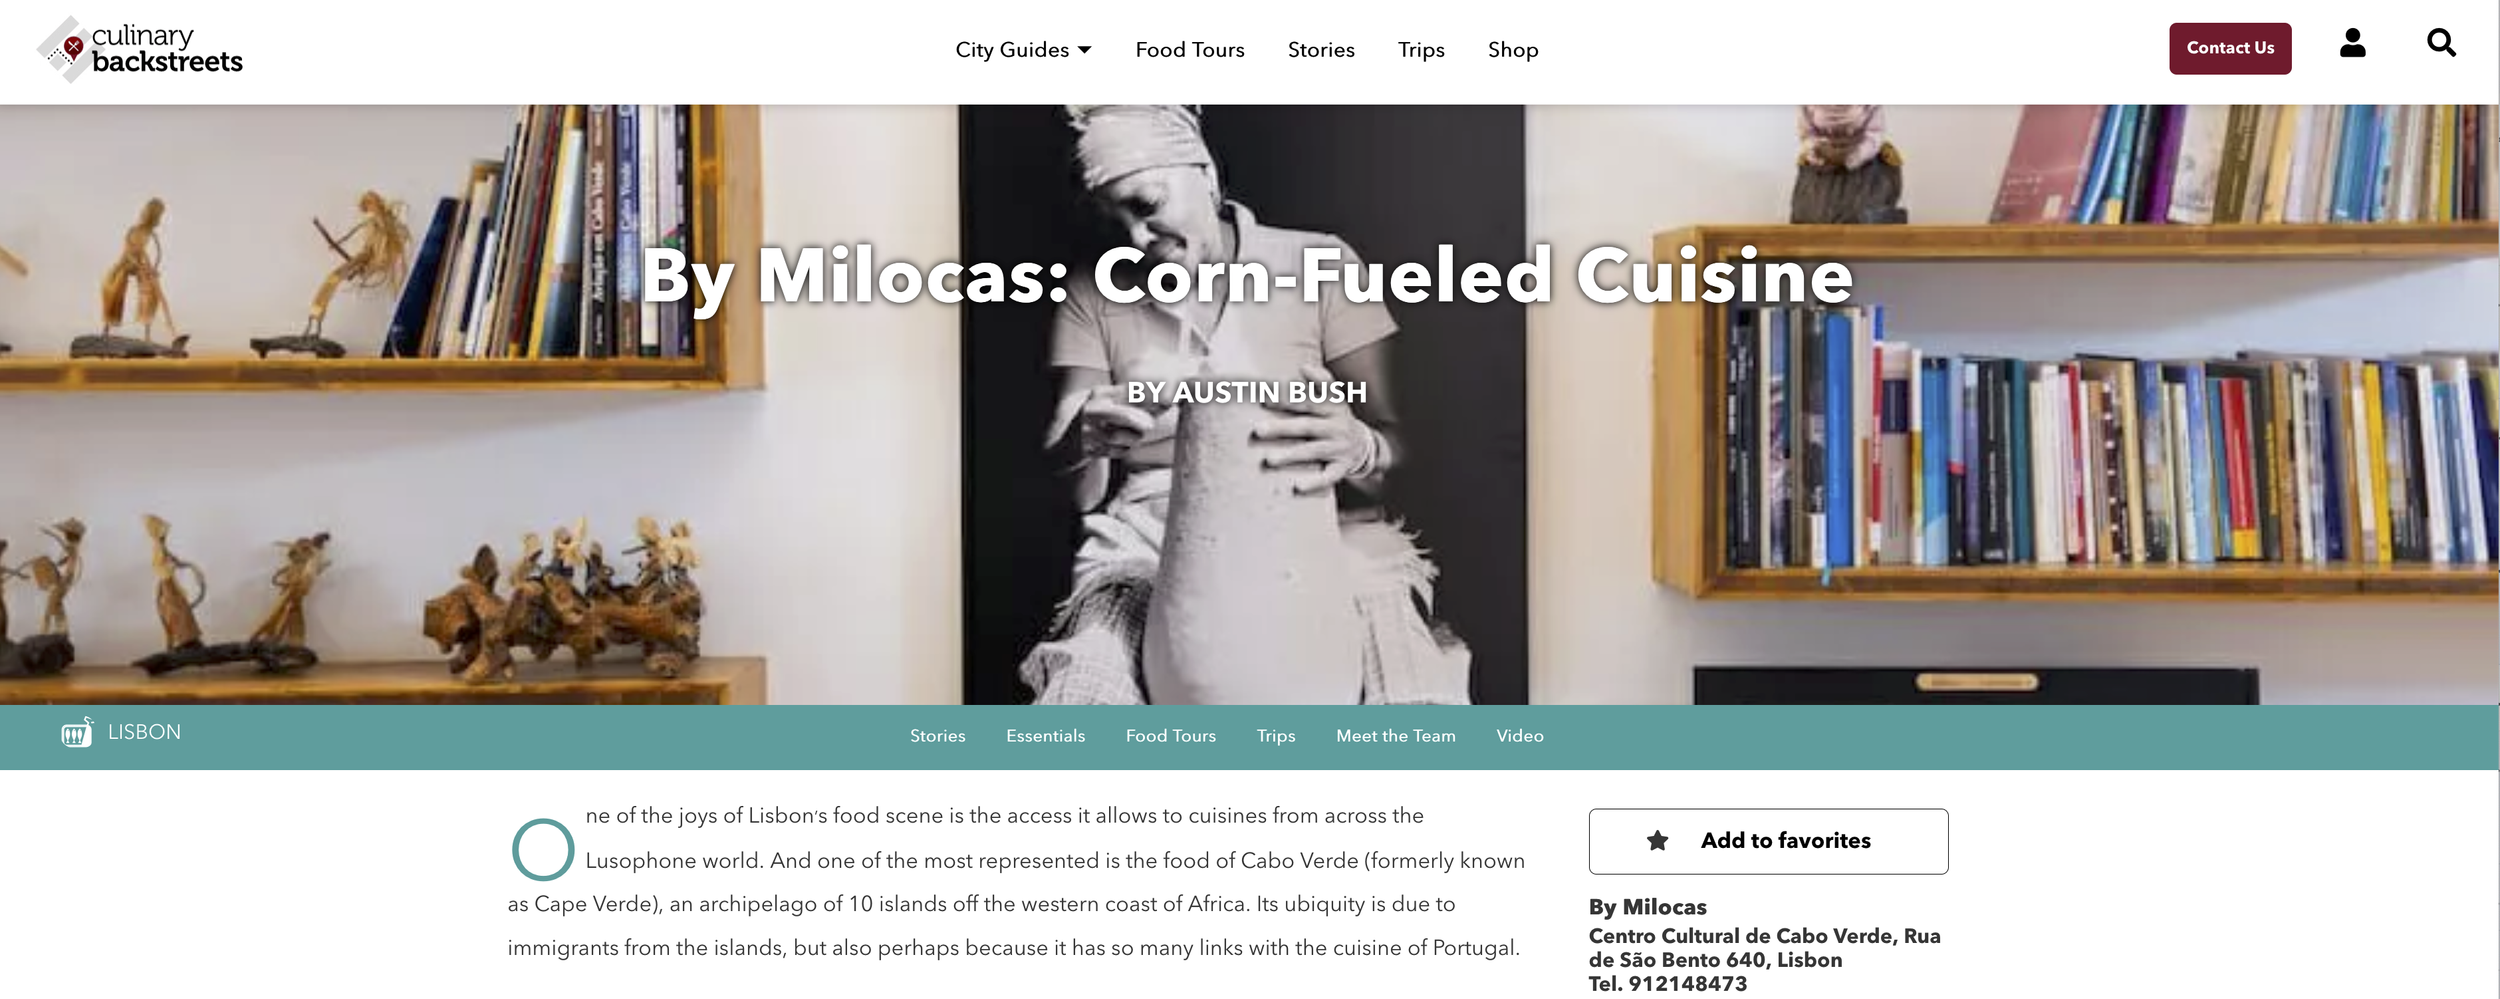  Click here to go to article: “ By Milocas: Corn-Fueled Cuisine ,” text and photos, Culinary Backstreets 